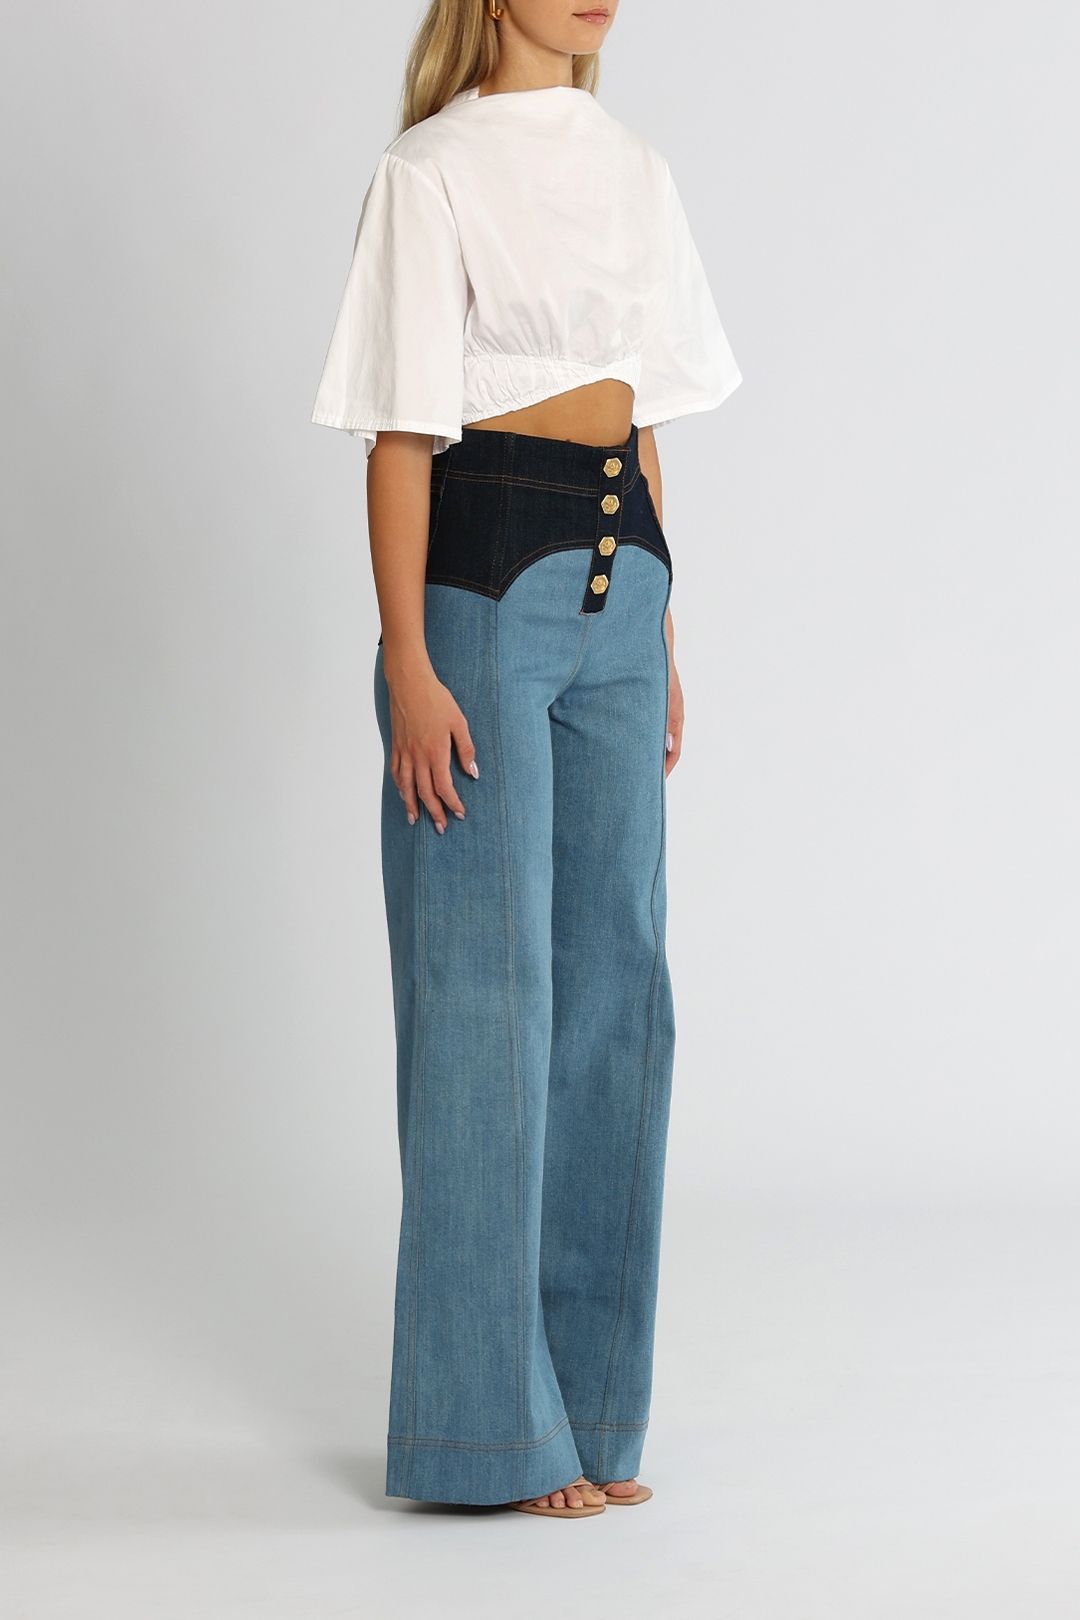 Alice McCall Poolside Pant High Waisted